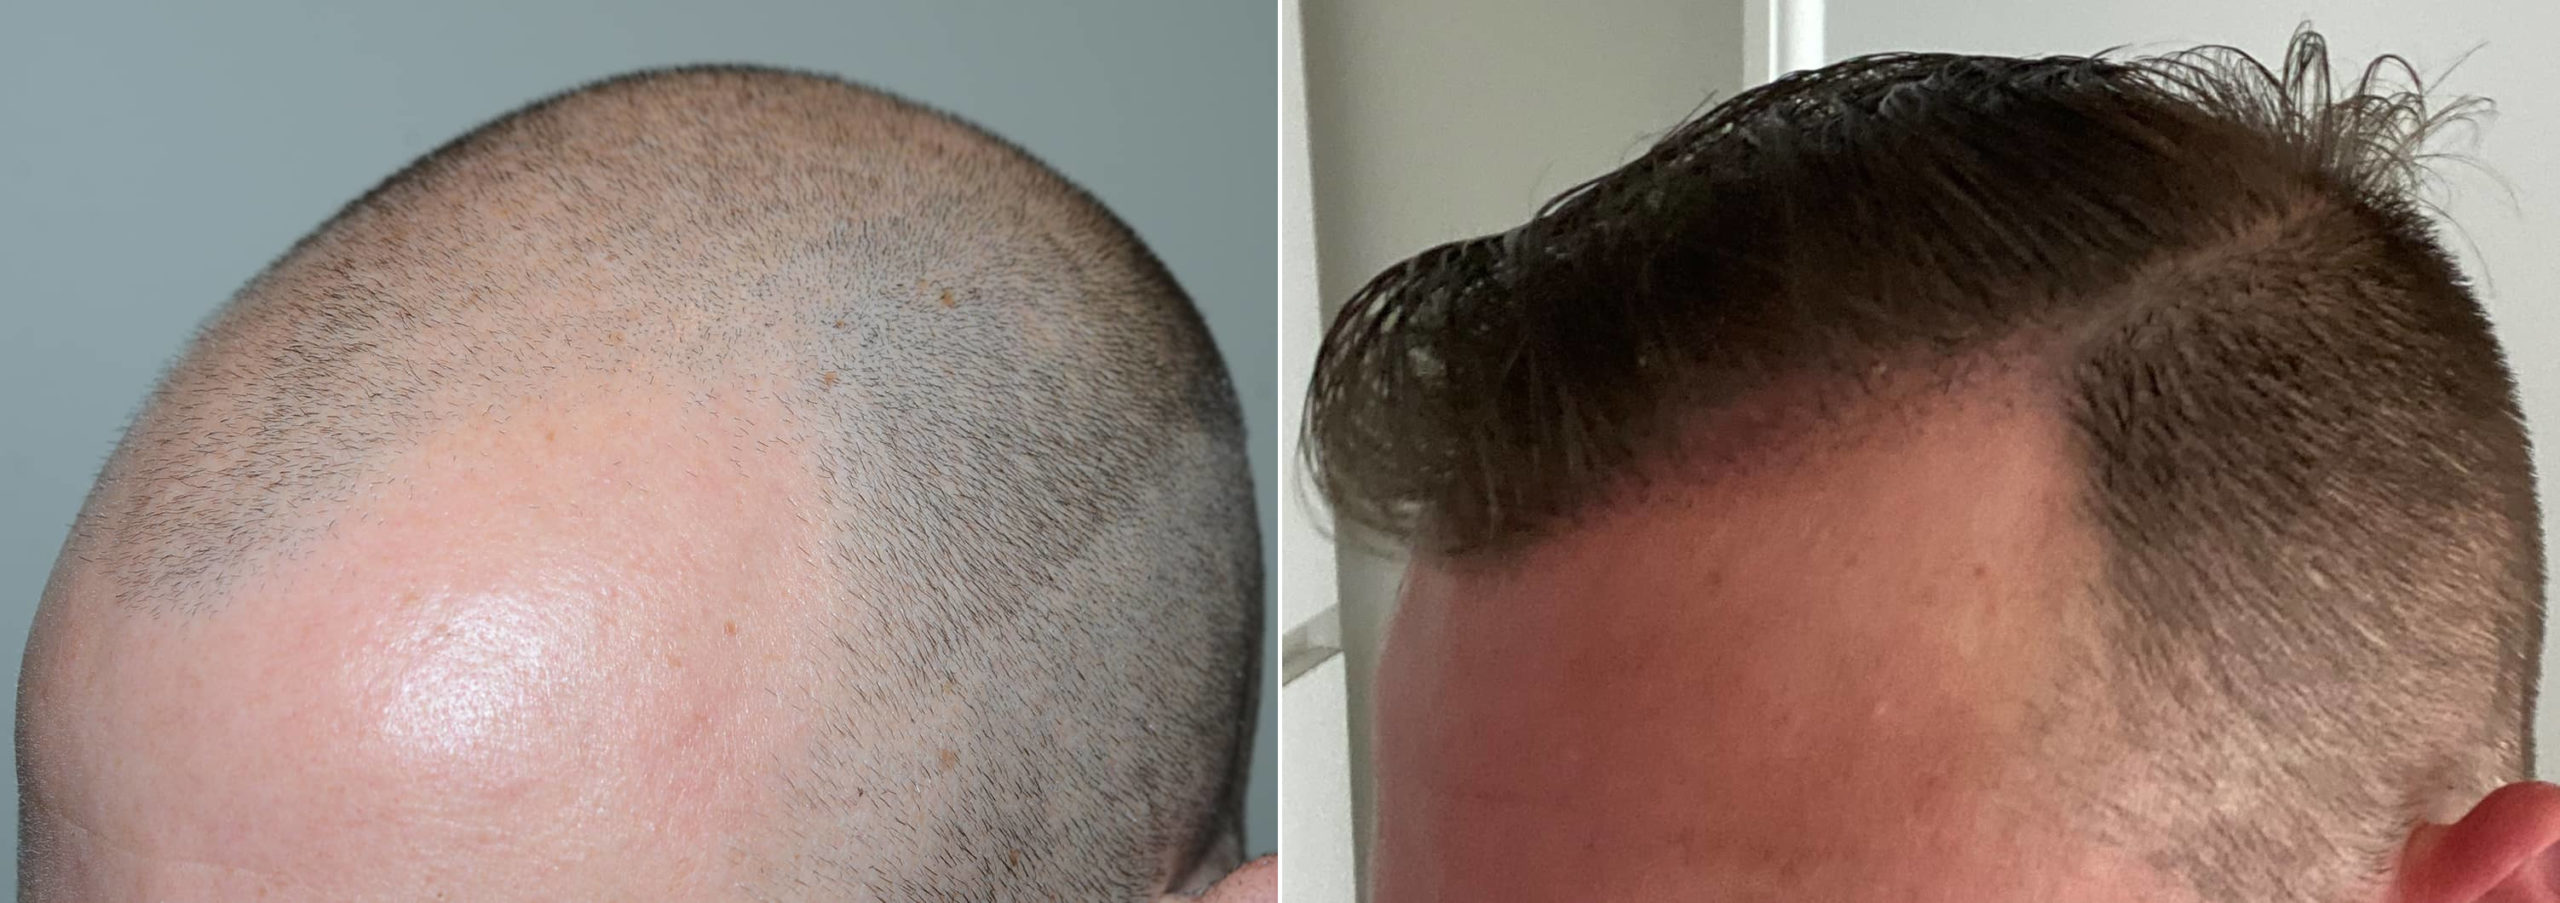 Can a Hair Transplant Be Done on Scar Tissue & Existing Scars?